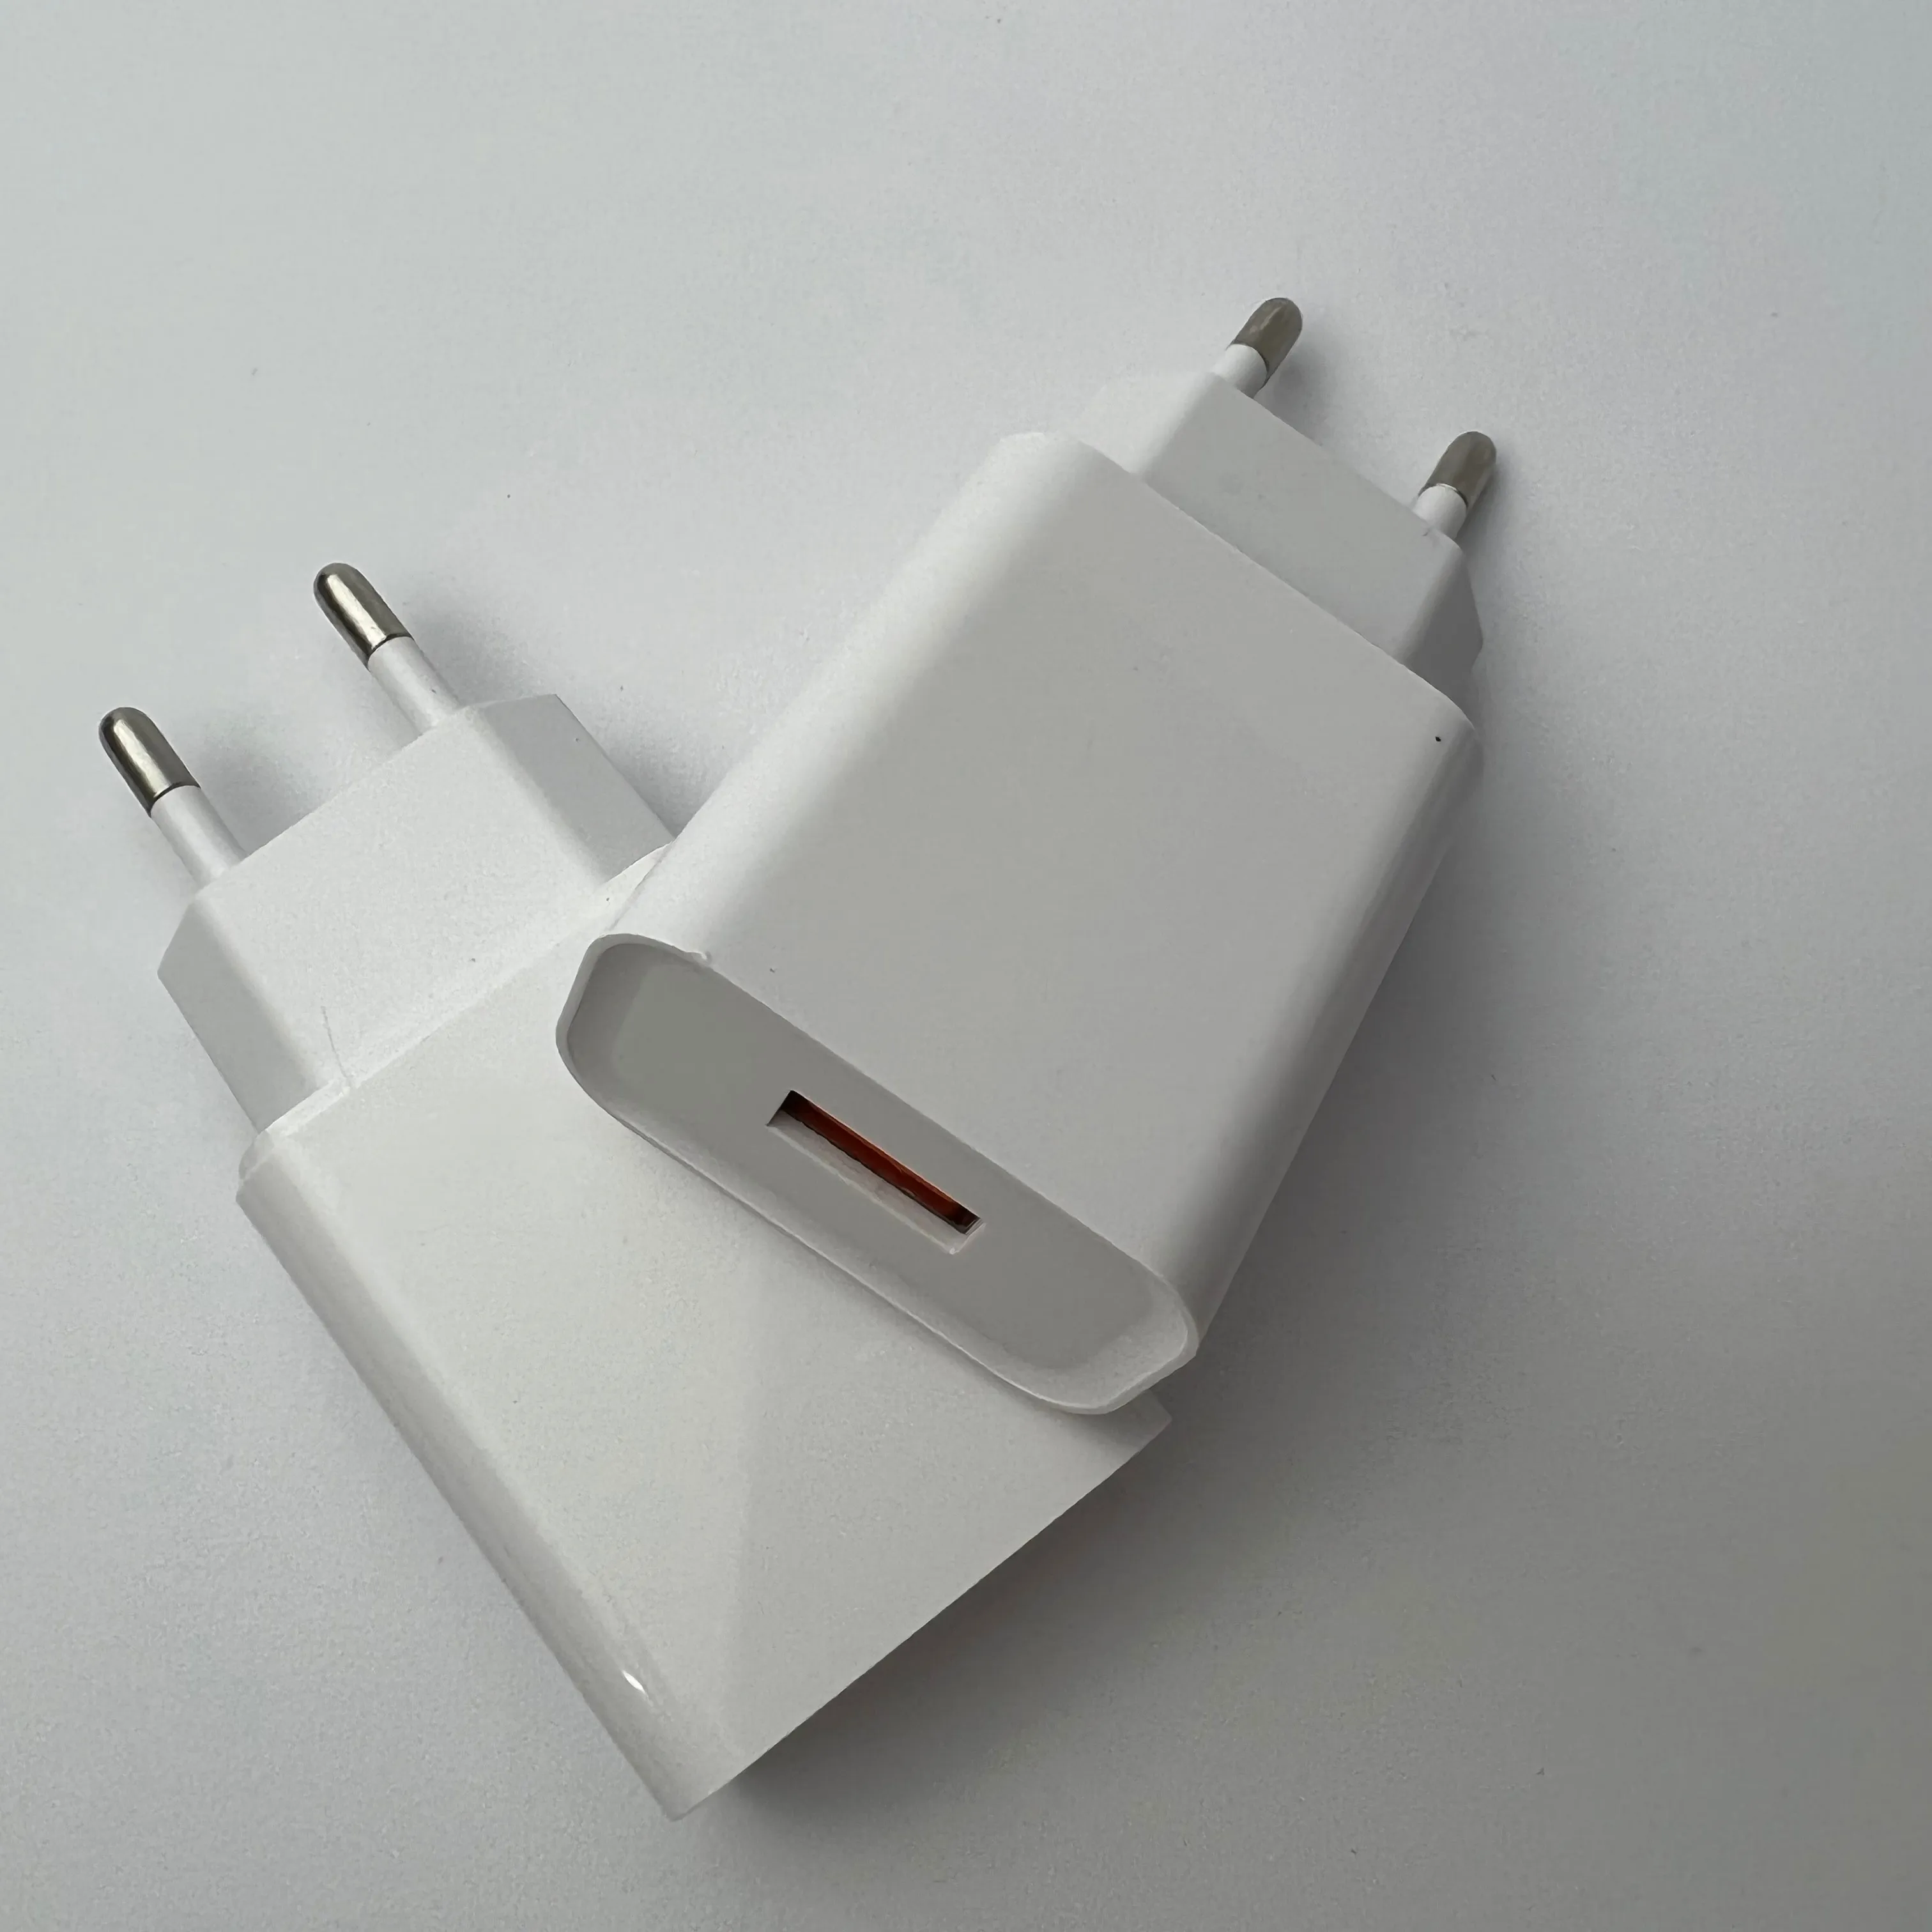 Hot Sales Charger Wallmount Mobile Adapter 5V/2A 5V/1A Switching Fast Charger